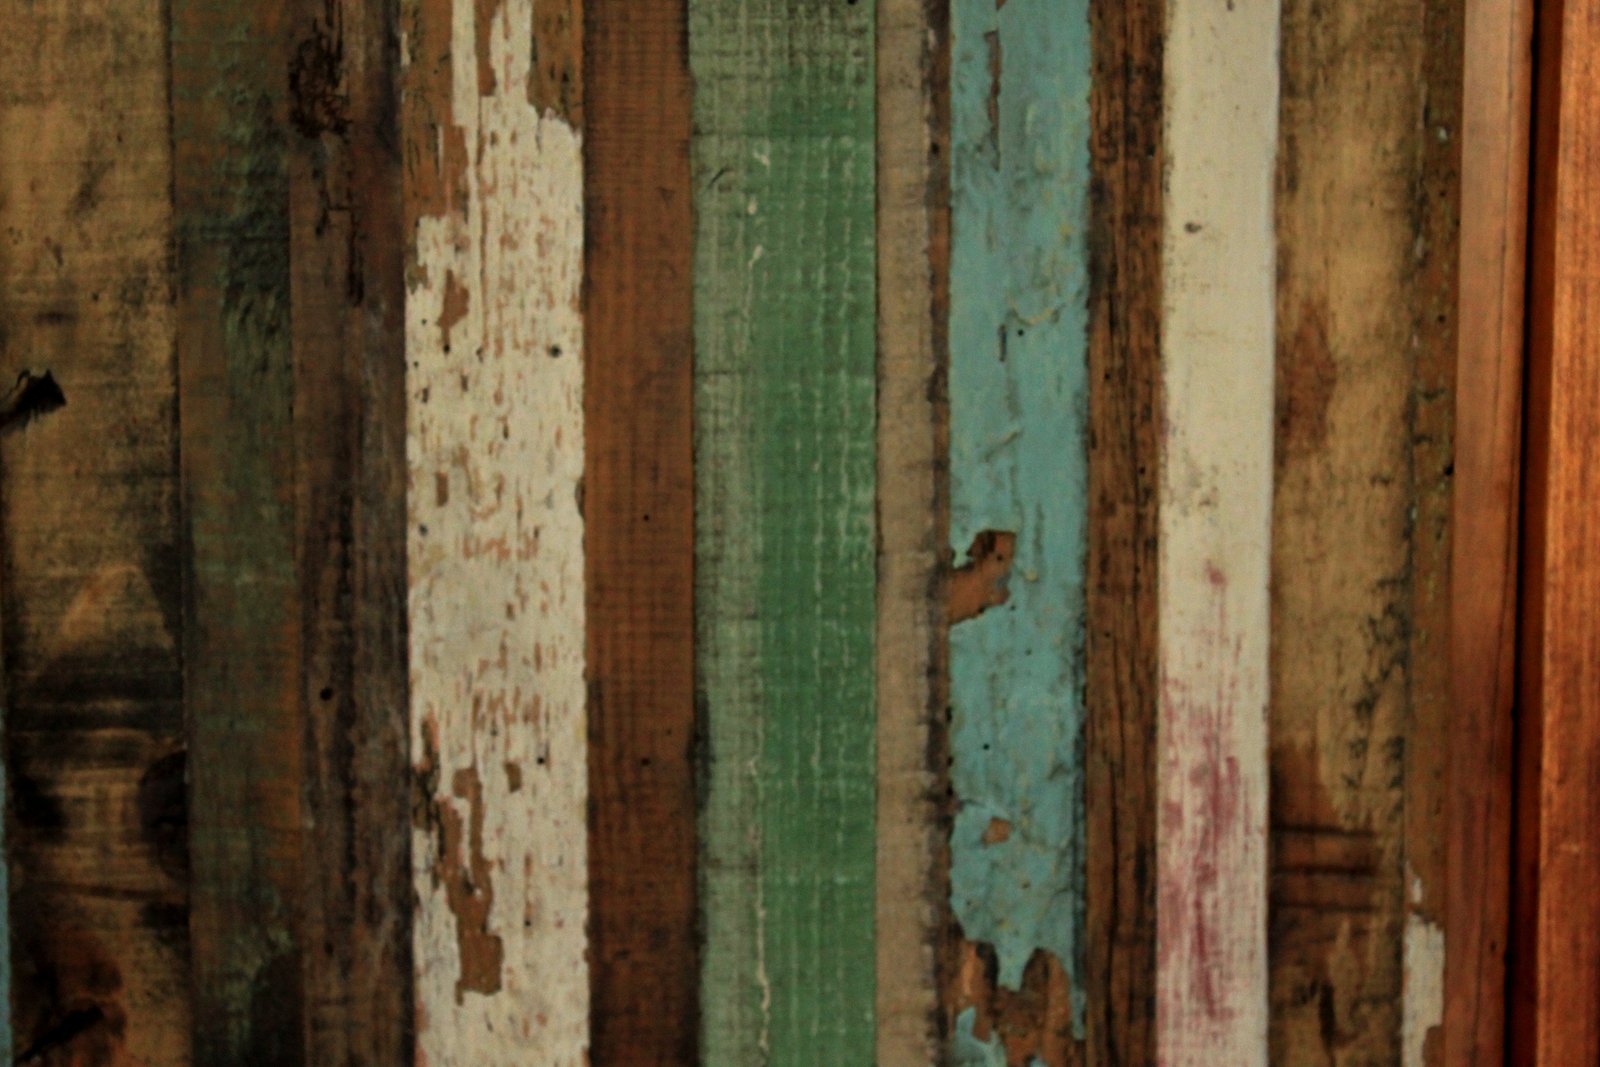 Texture Rustic Wood by Pomis 1600x1067